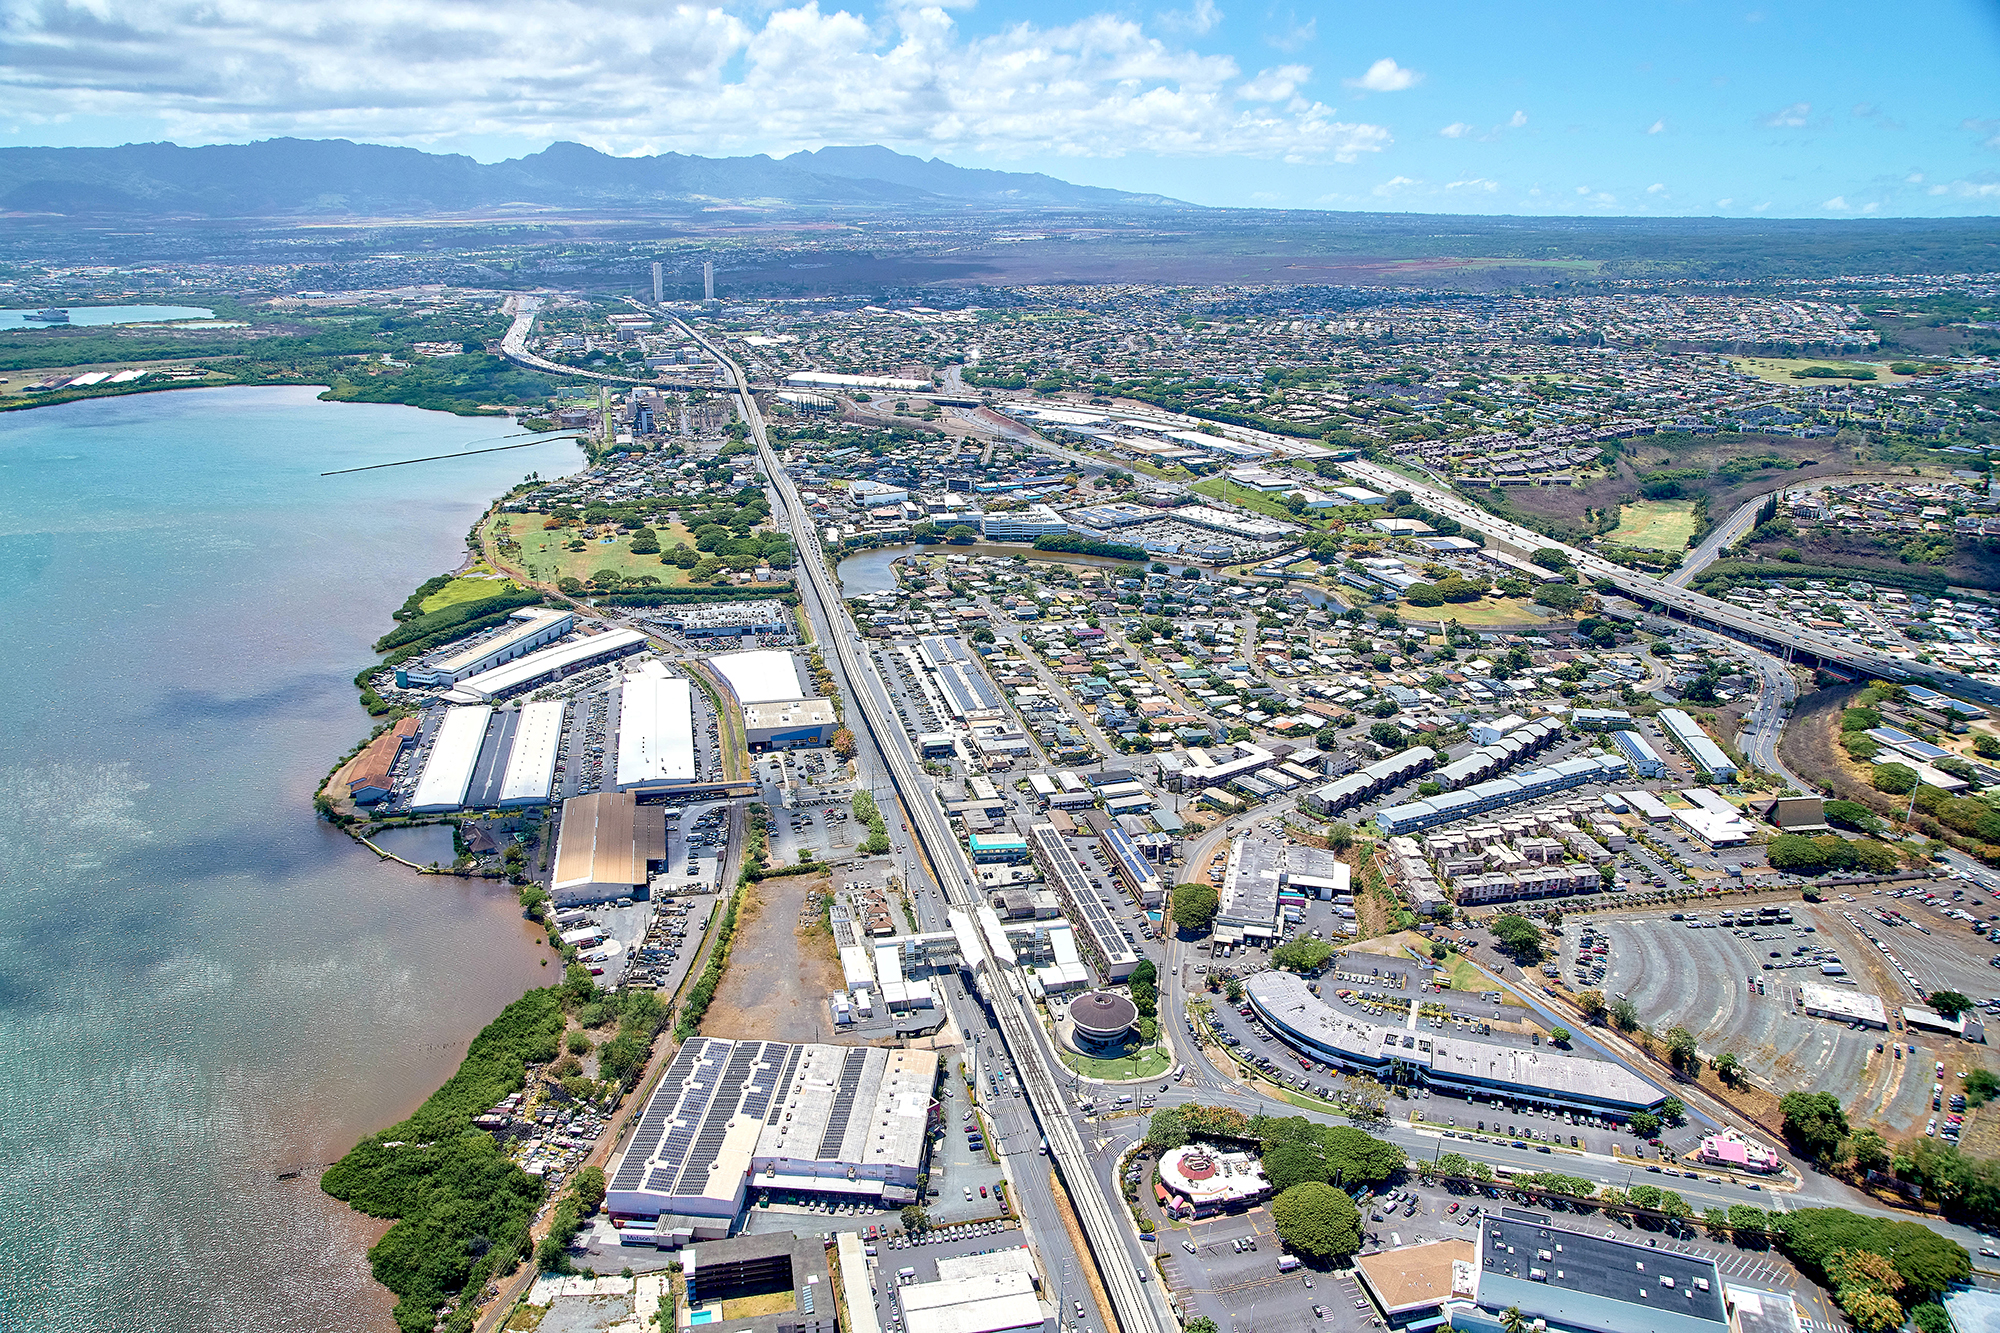 The project had to contend with unpredictable and changeable groundwater, including tidal influences. Shown here is the Kalauao/Pearlridge station. (Image courtesy of HART)